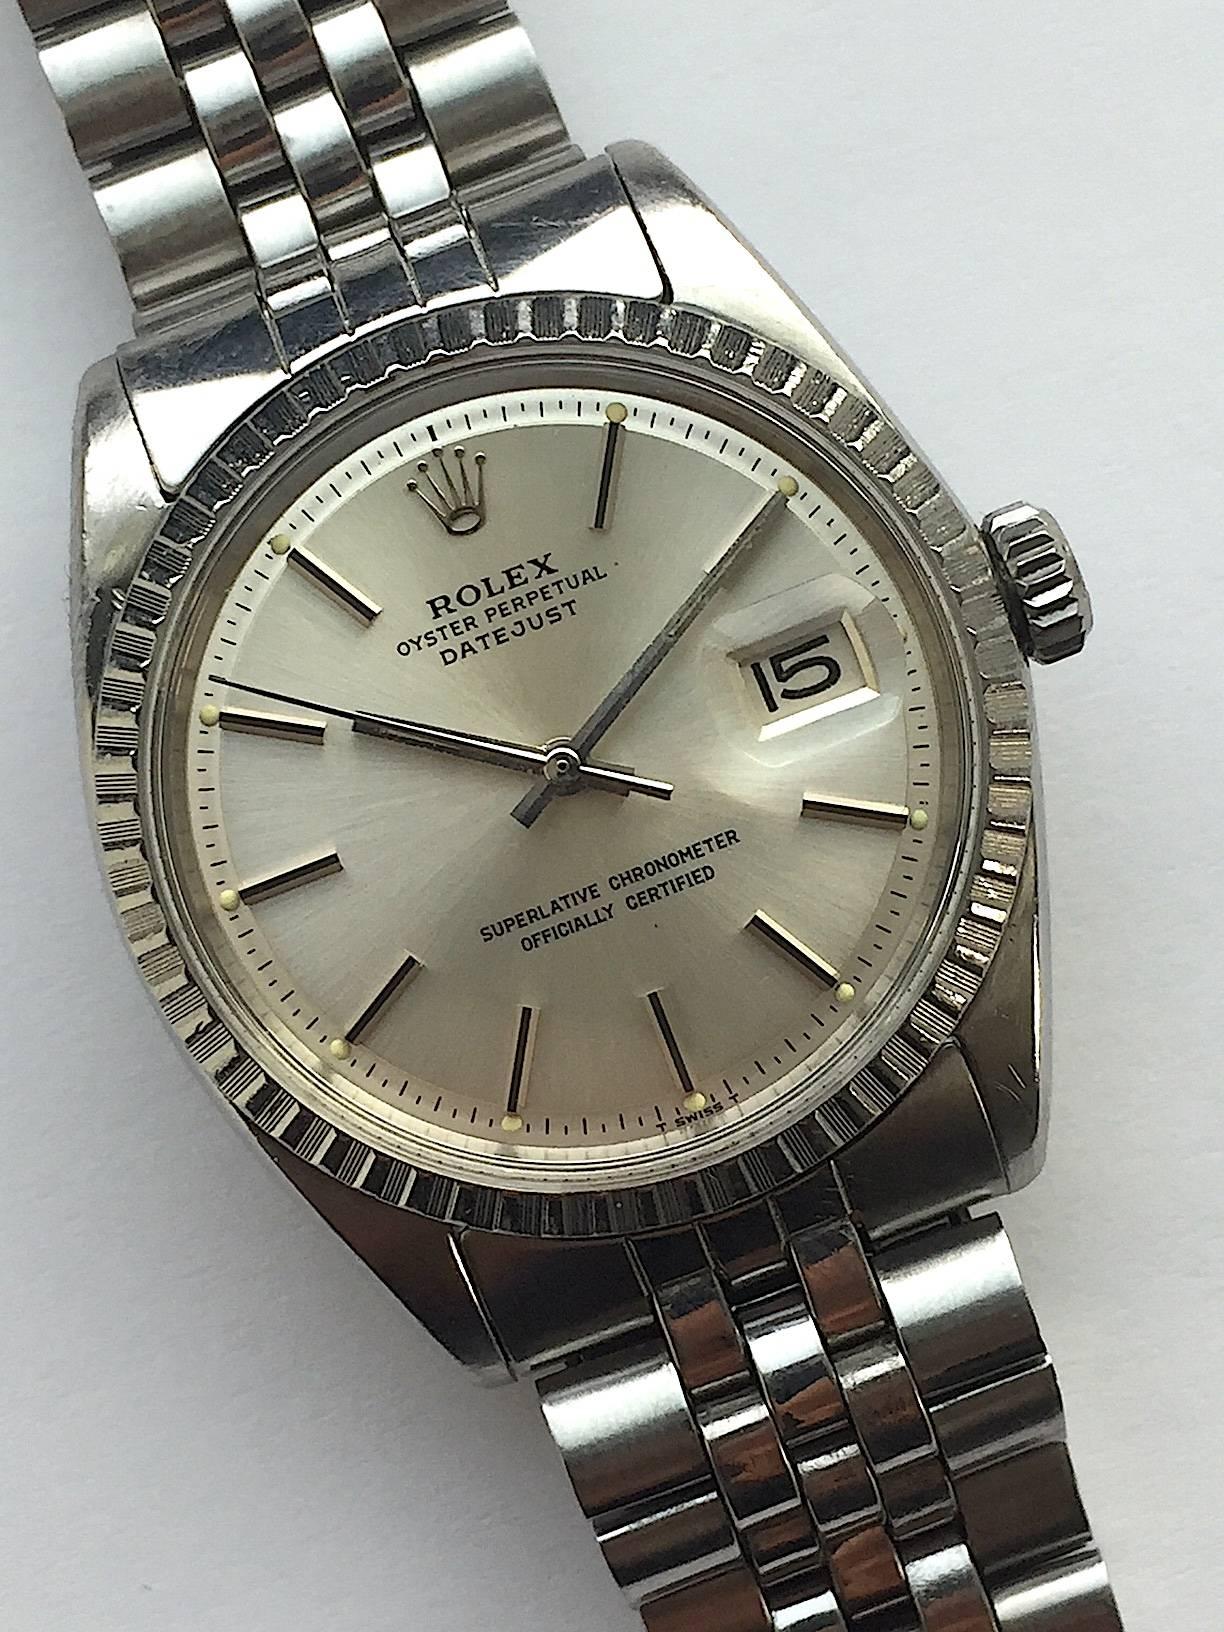 Rolex Stainless Steel Oyster Perpetual Datejust Wristwatch
Factory Silvered Dial with Applied Stick Hour Markers
Stainless Steel Engine-Turned Bezel
36mm in size 
Rolex Calibre Base 1500 Base Automatic Non-QuickSet Movement
Acrylic Crystal
1960's